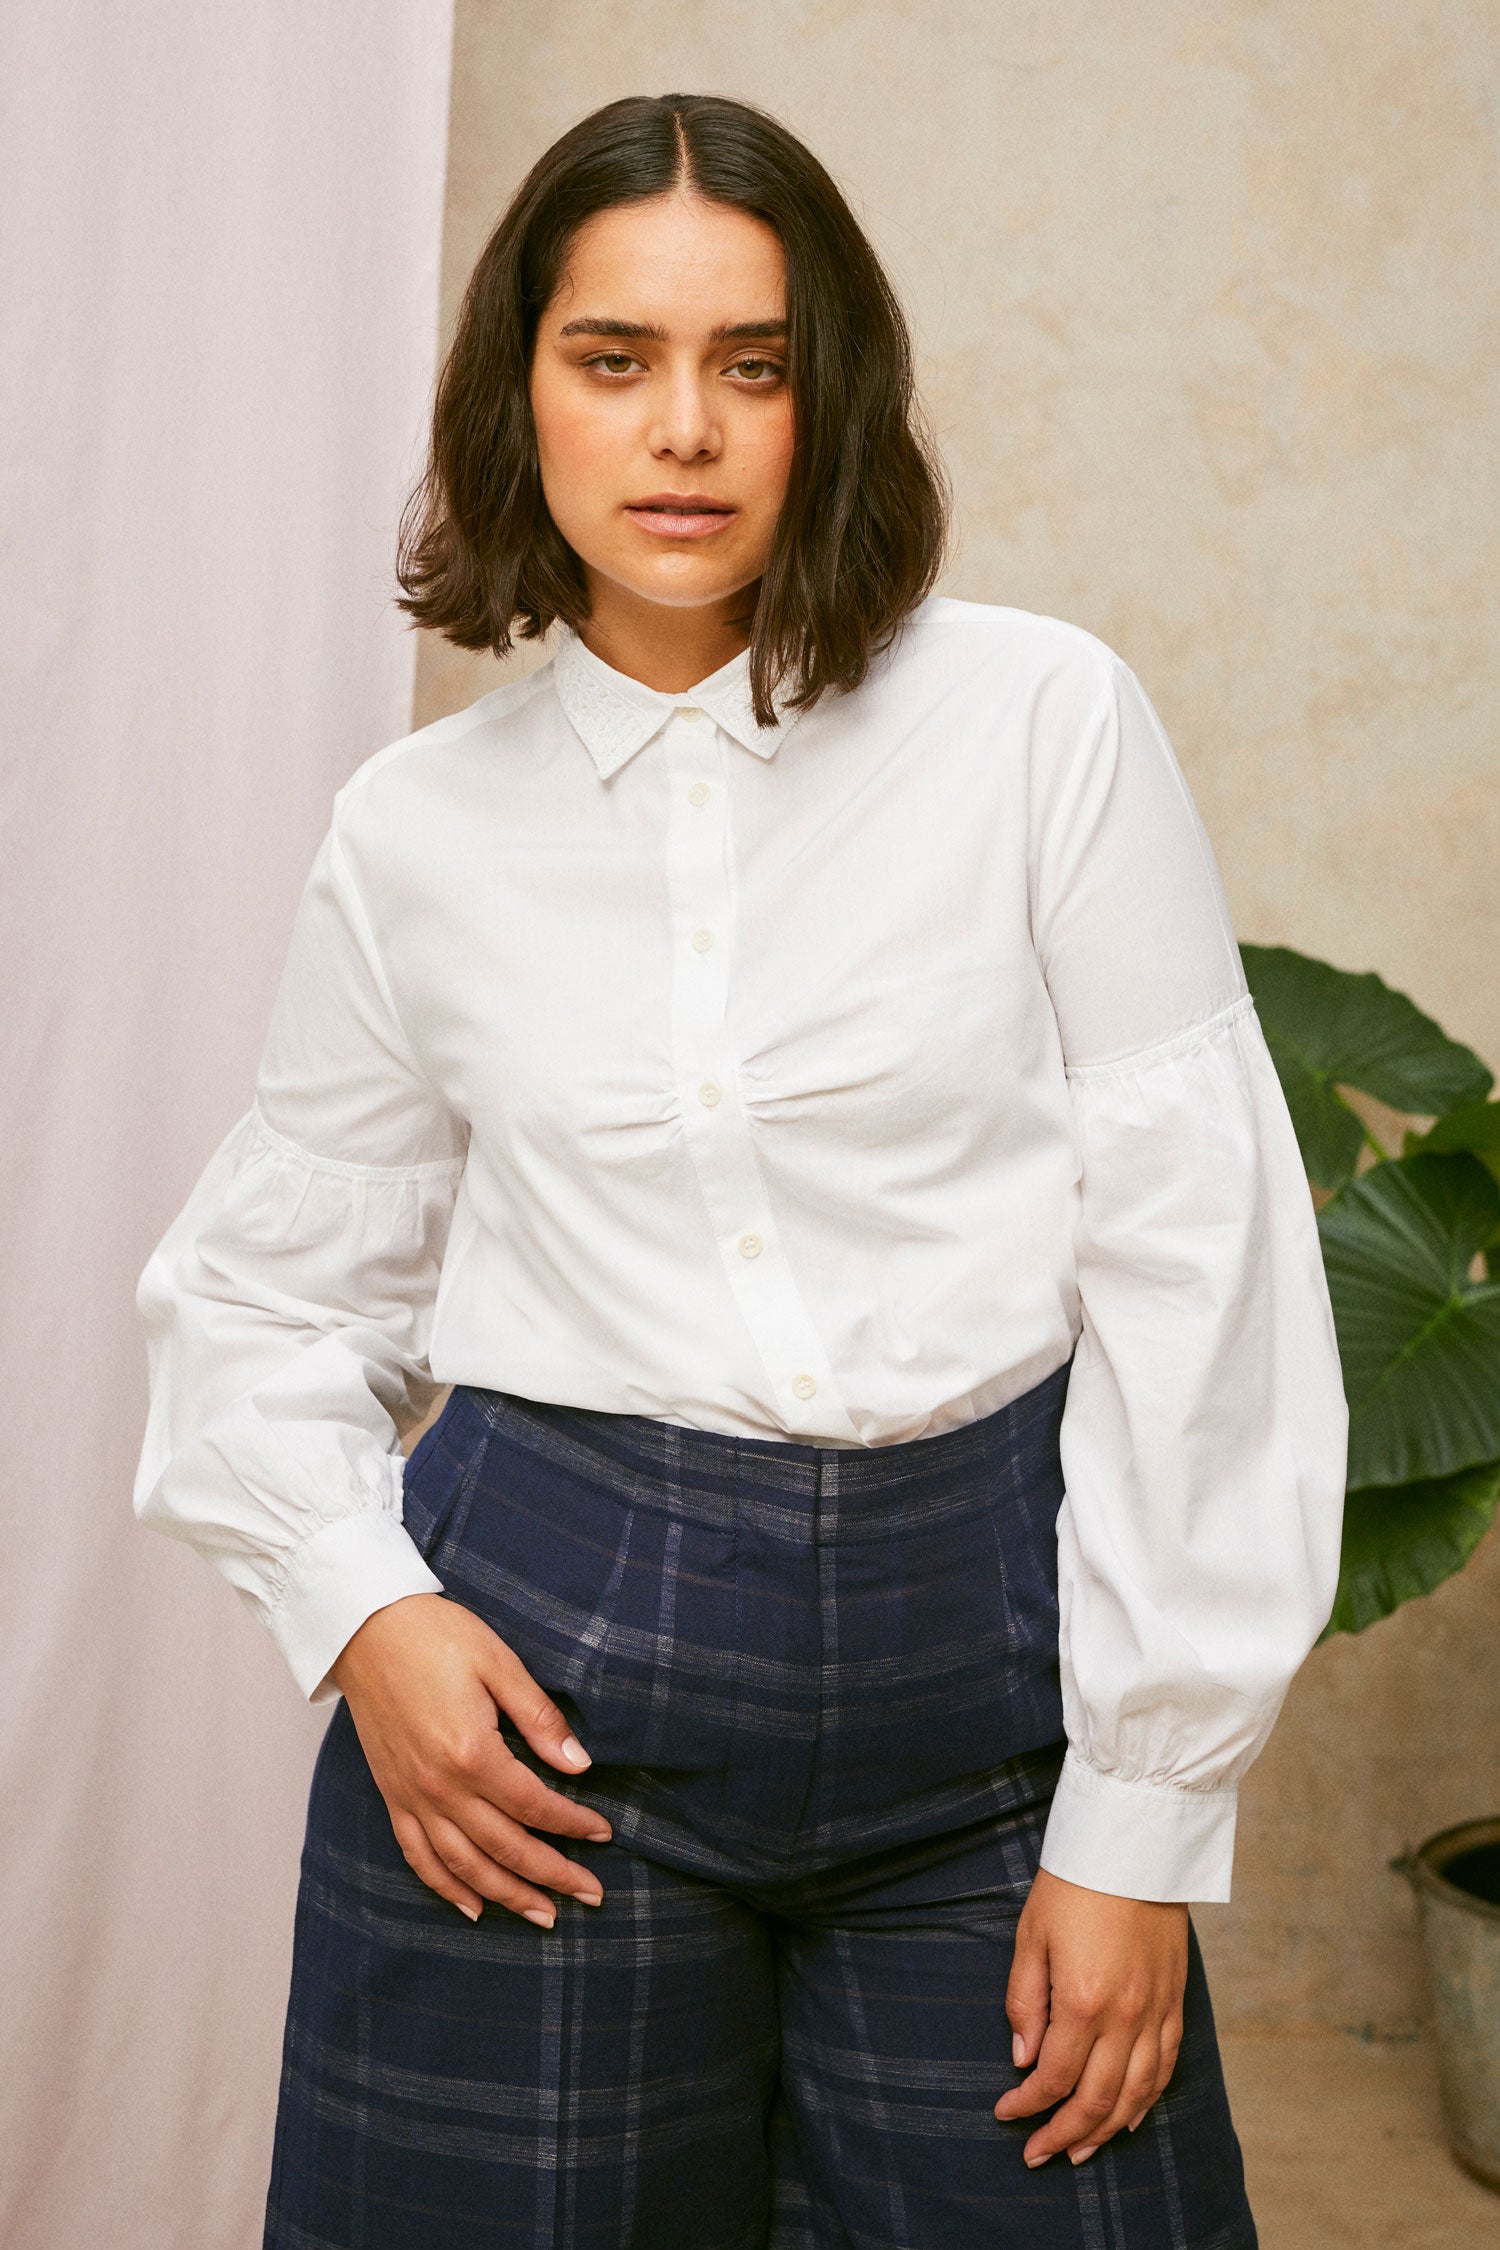 Close up of model wearing Saywood's Amelia check trousers, wide leg culotte shape in navy check. Worn with the white shirt, Edi volume sleeve shirt with lace collar, tucked into the trouser. A plant and drop of pink fabric can be seen in the background.